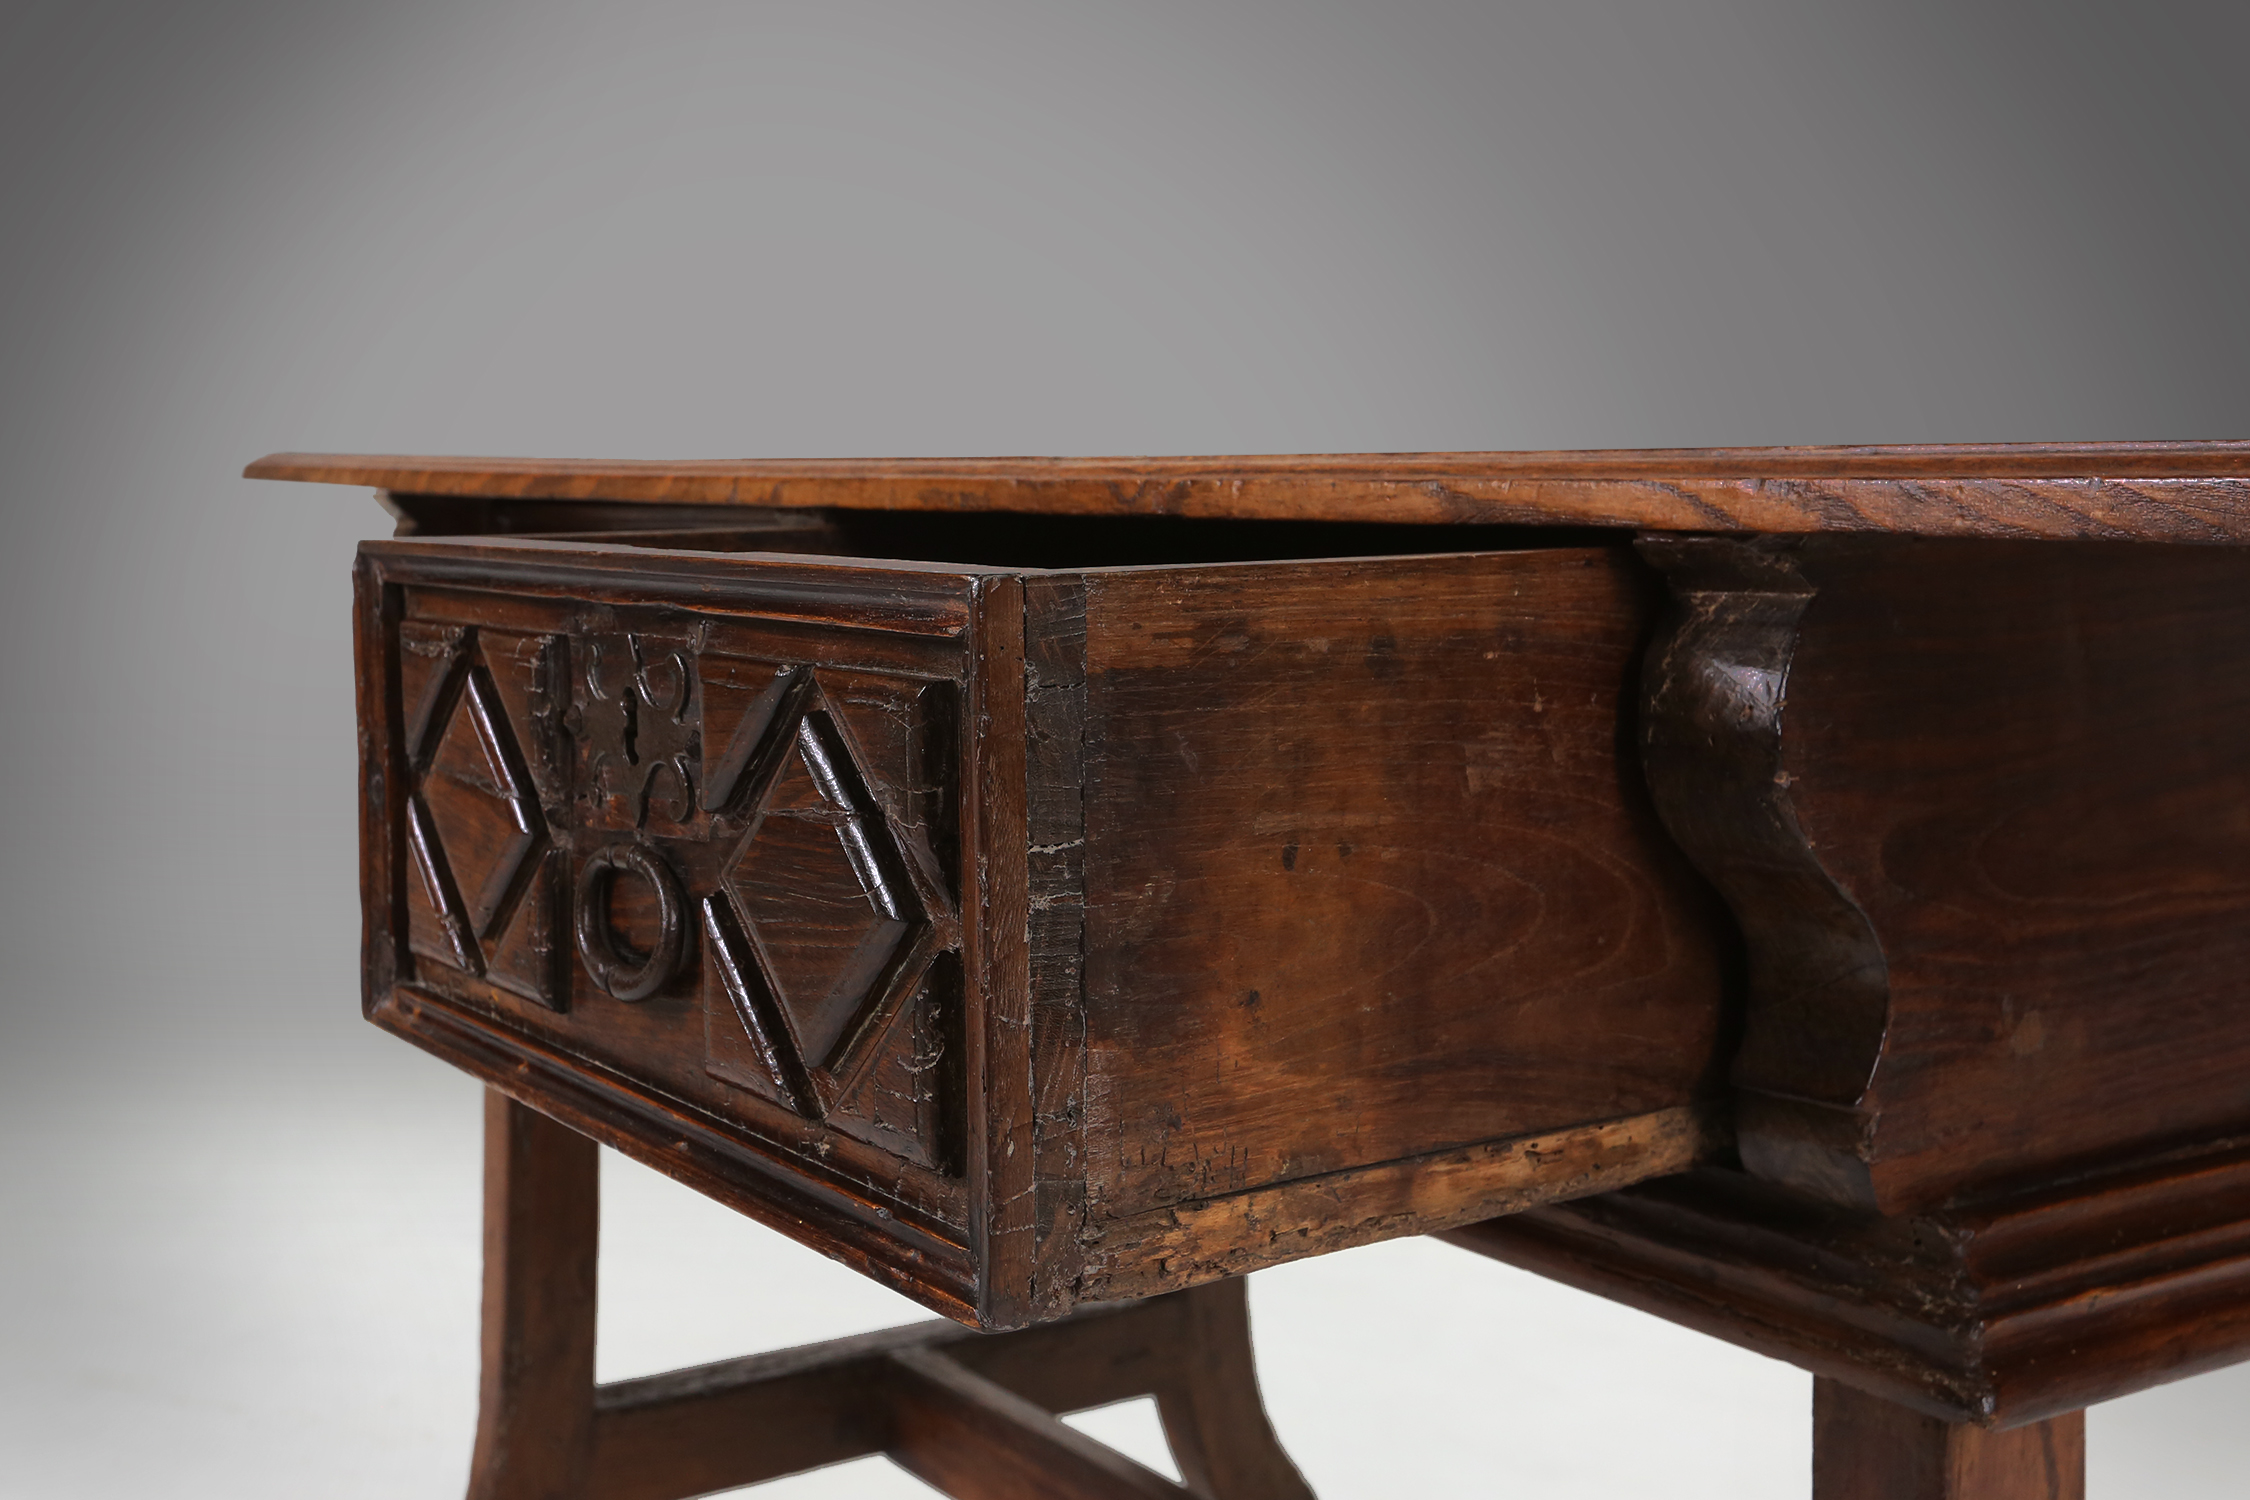 Antique Oak Spanish Console Table with Handcrafted Drawers, 18th Centurythumbnail